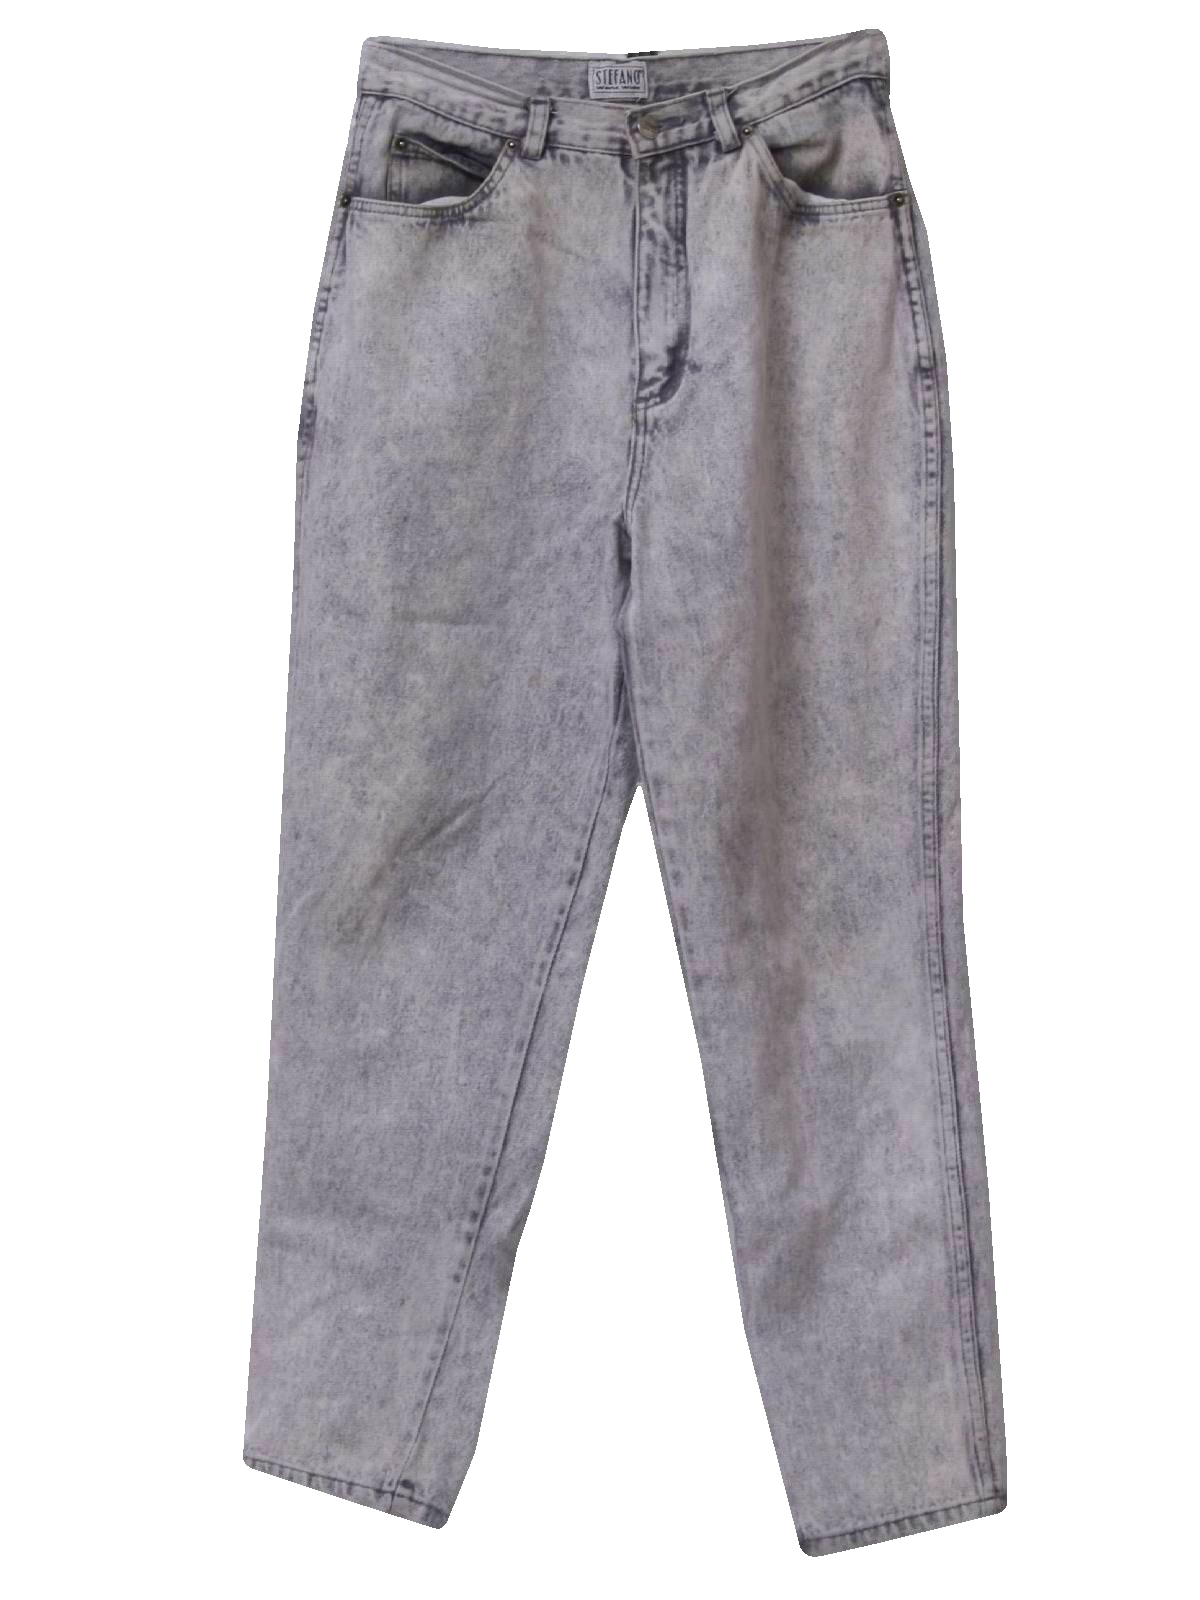 Retro 1990s Pants: 90s -Stefano- Womens grey background stone washed ...